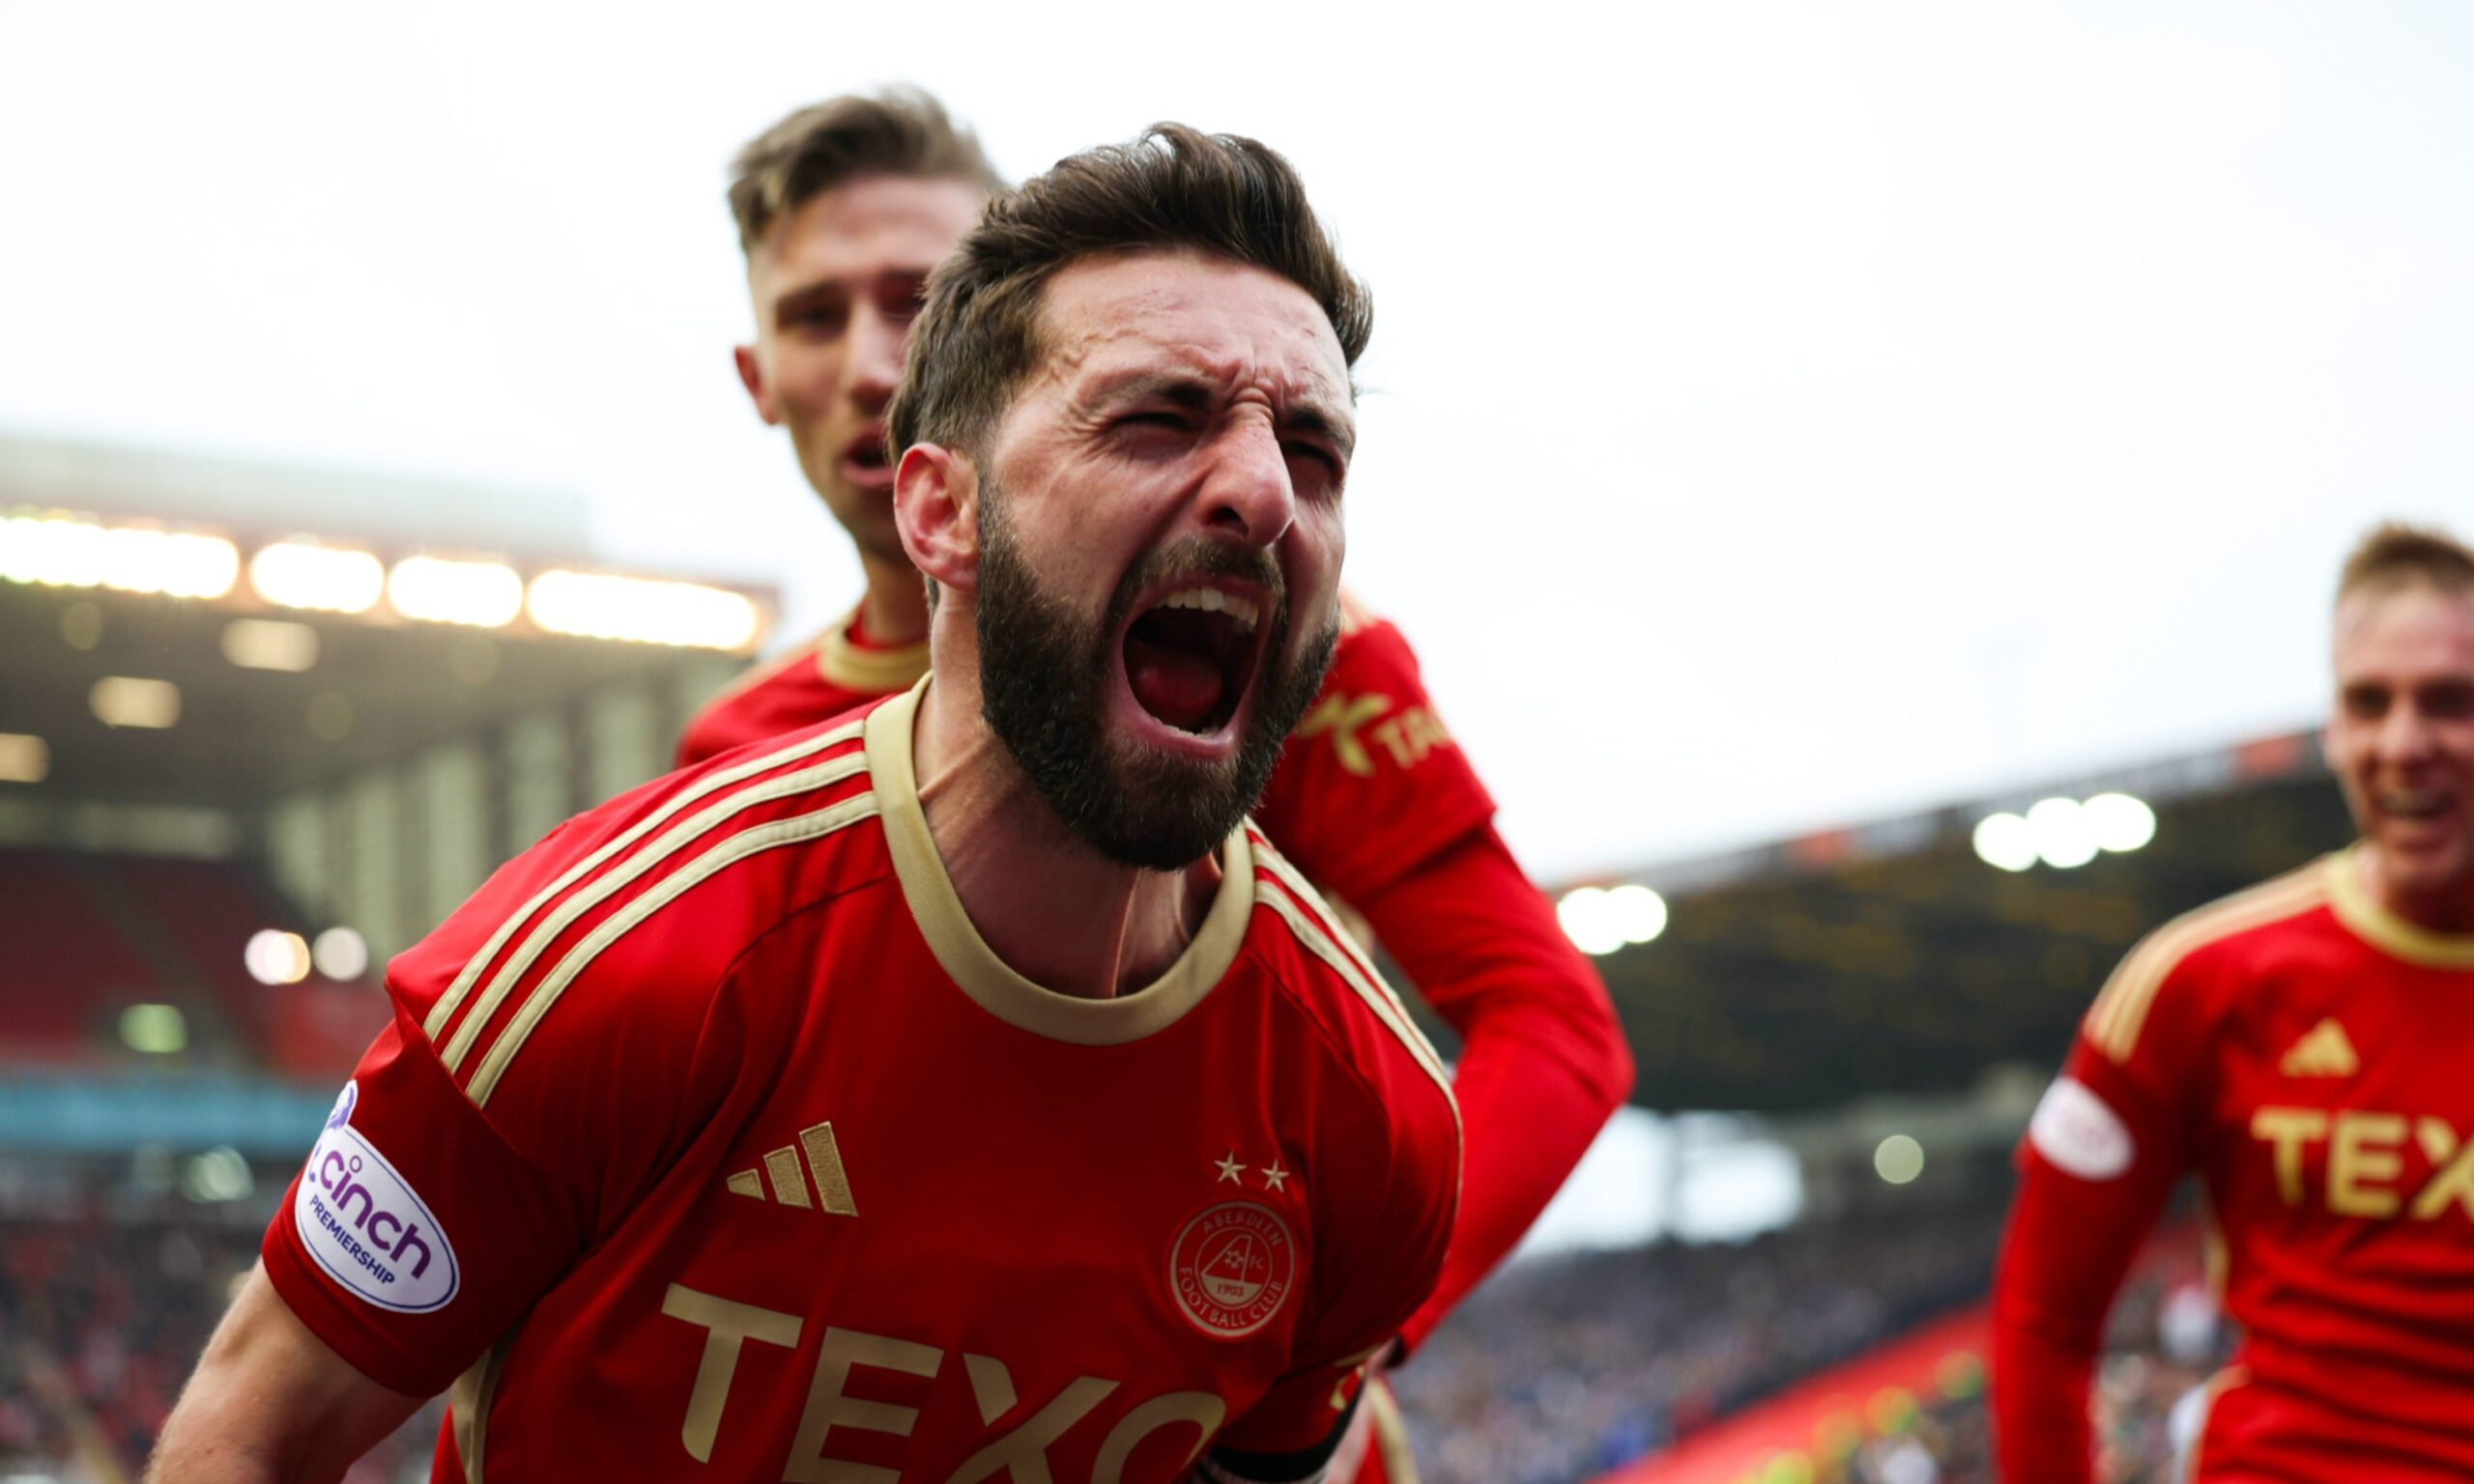 Aberdeen's Graeme Shinnie celebrates scoring to make it 2-0 against Kilmarnock in the Scottish Cup quarter-final at Pittodrie.